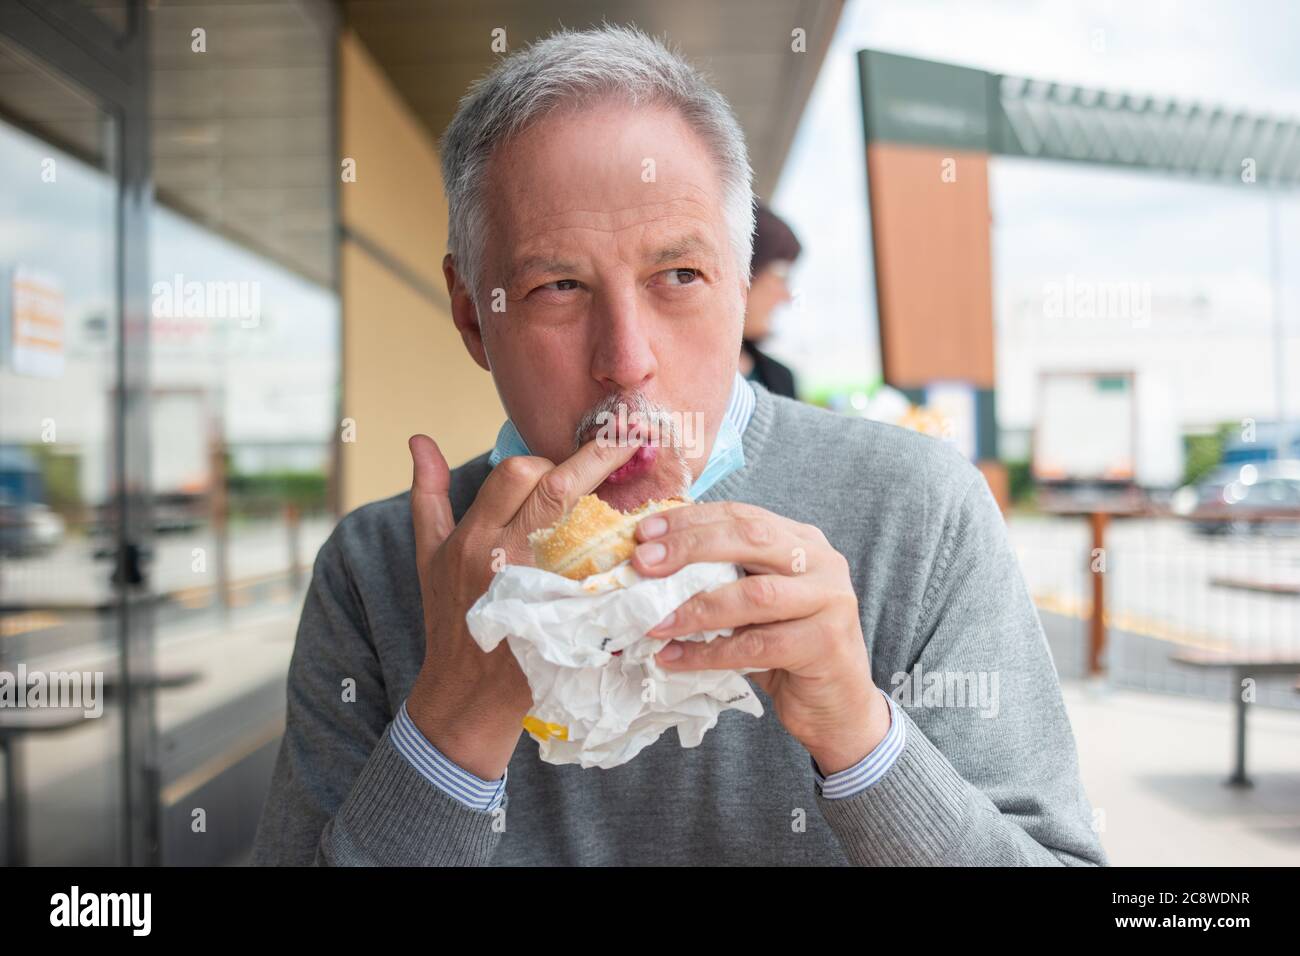 Man eating his fast food lunch hamburger during with a mask on his chin, coronavirus concept Stock Photo